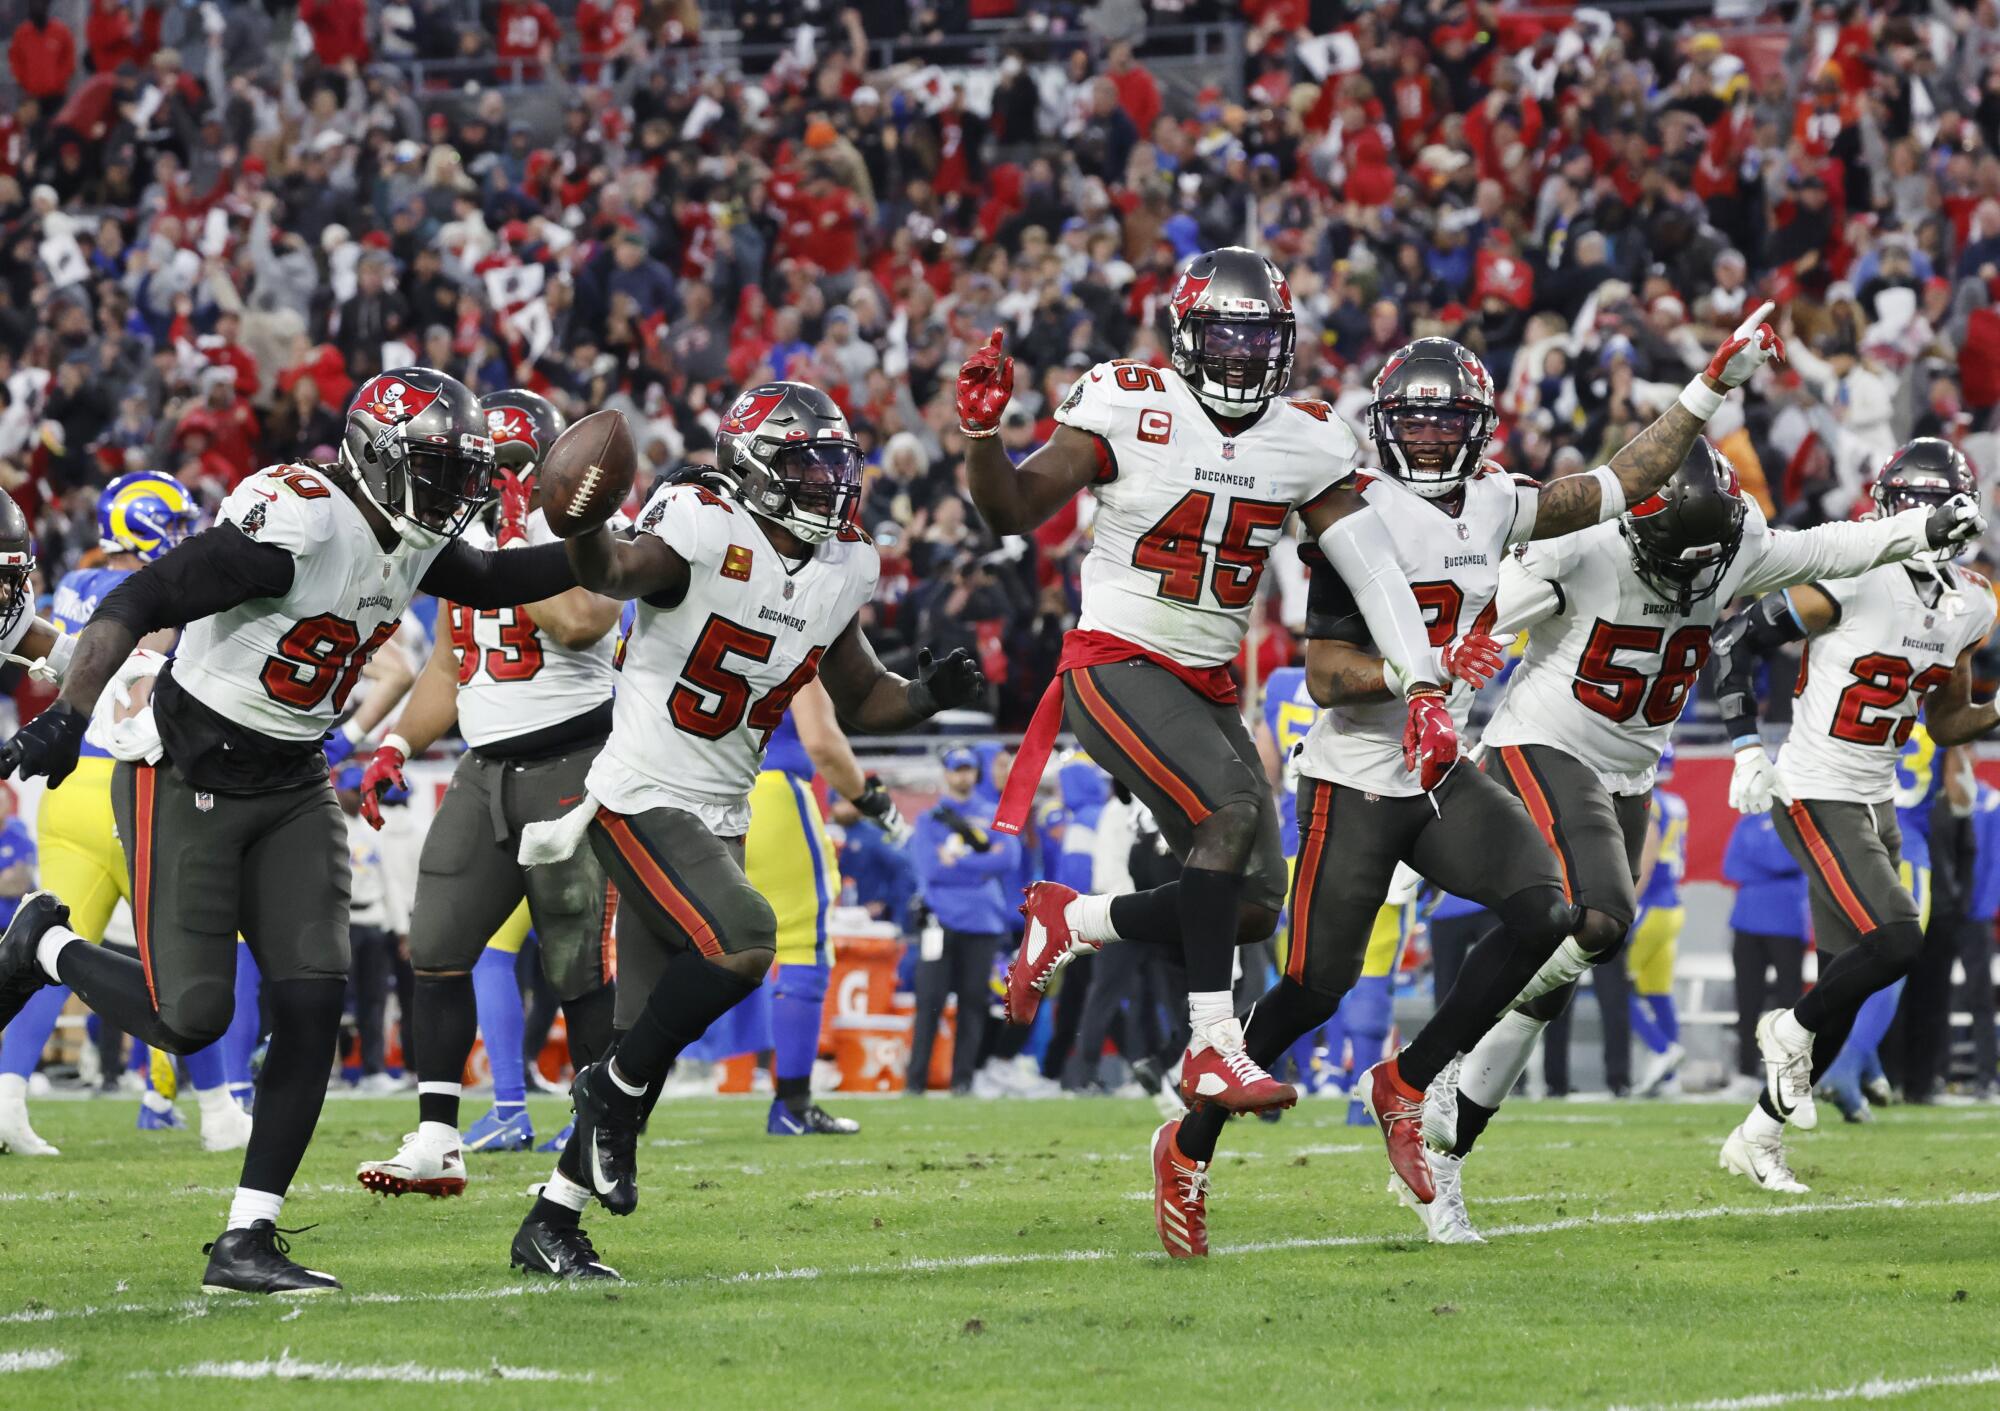 Buccaneers inside linebacker Lavonte David celebrates after recovering a fumble by Rams running back Cam Akers 